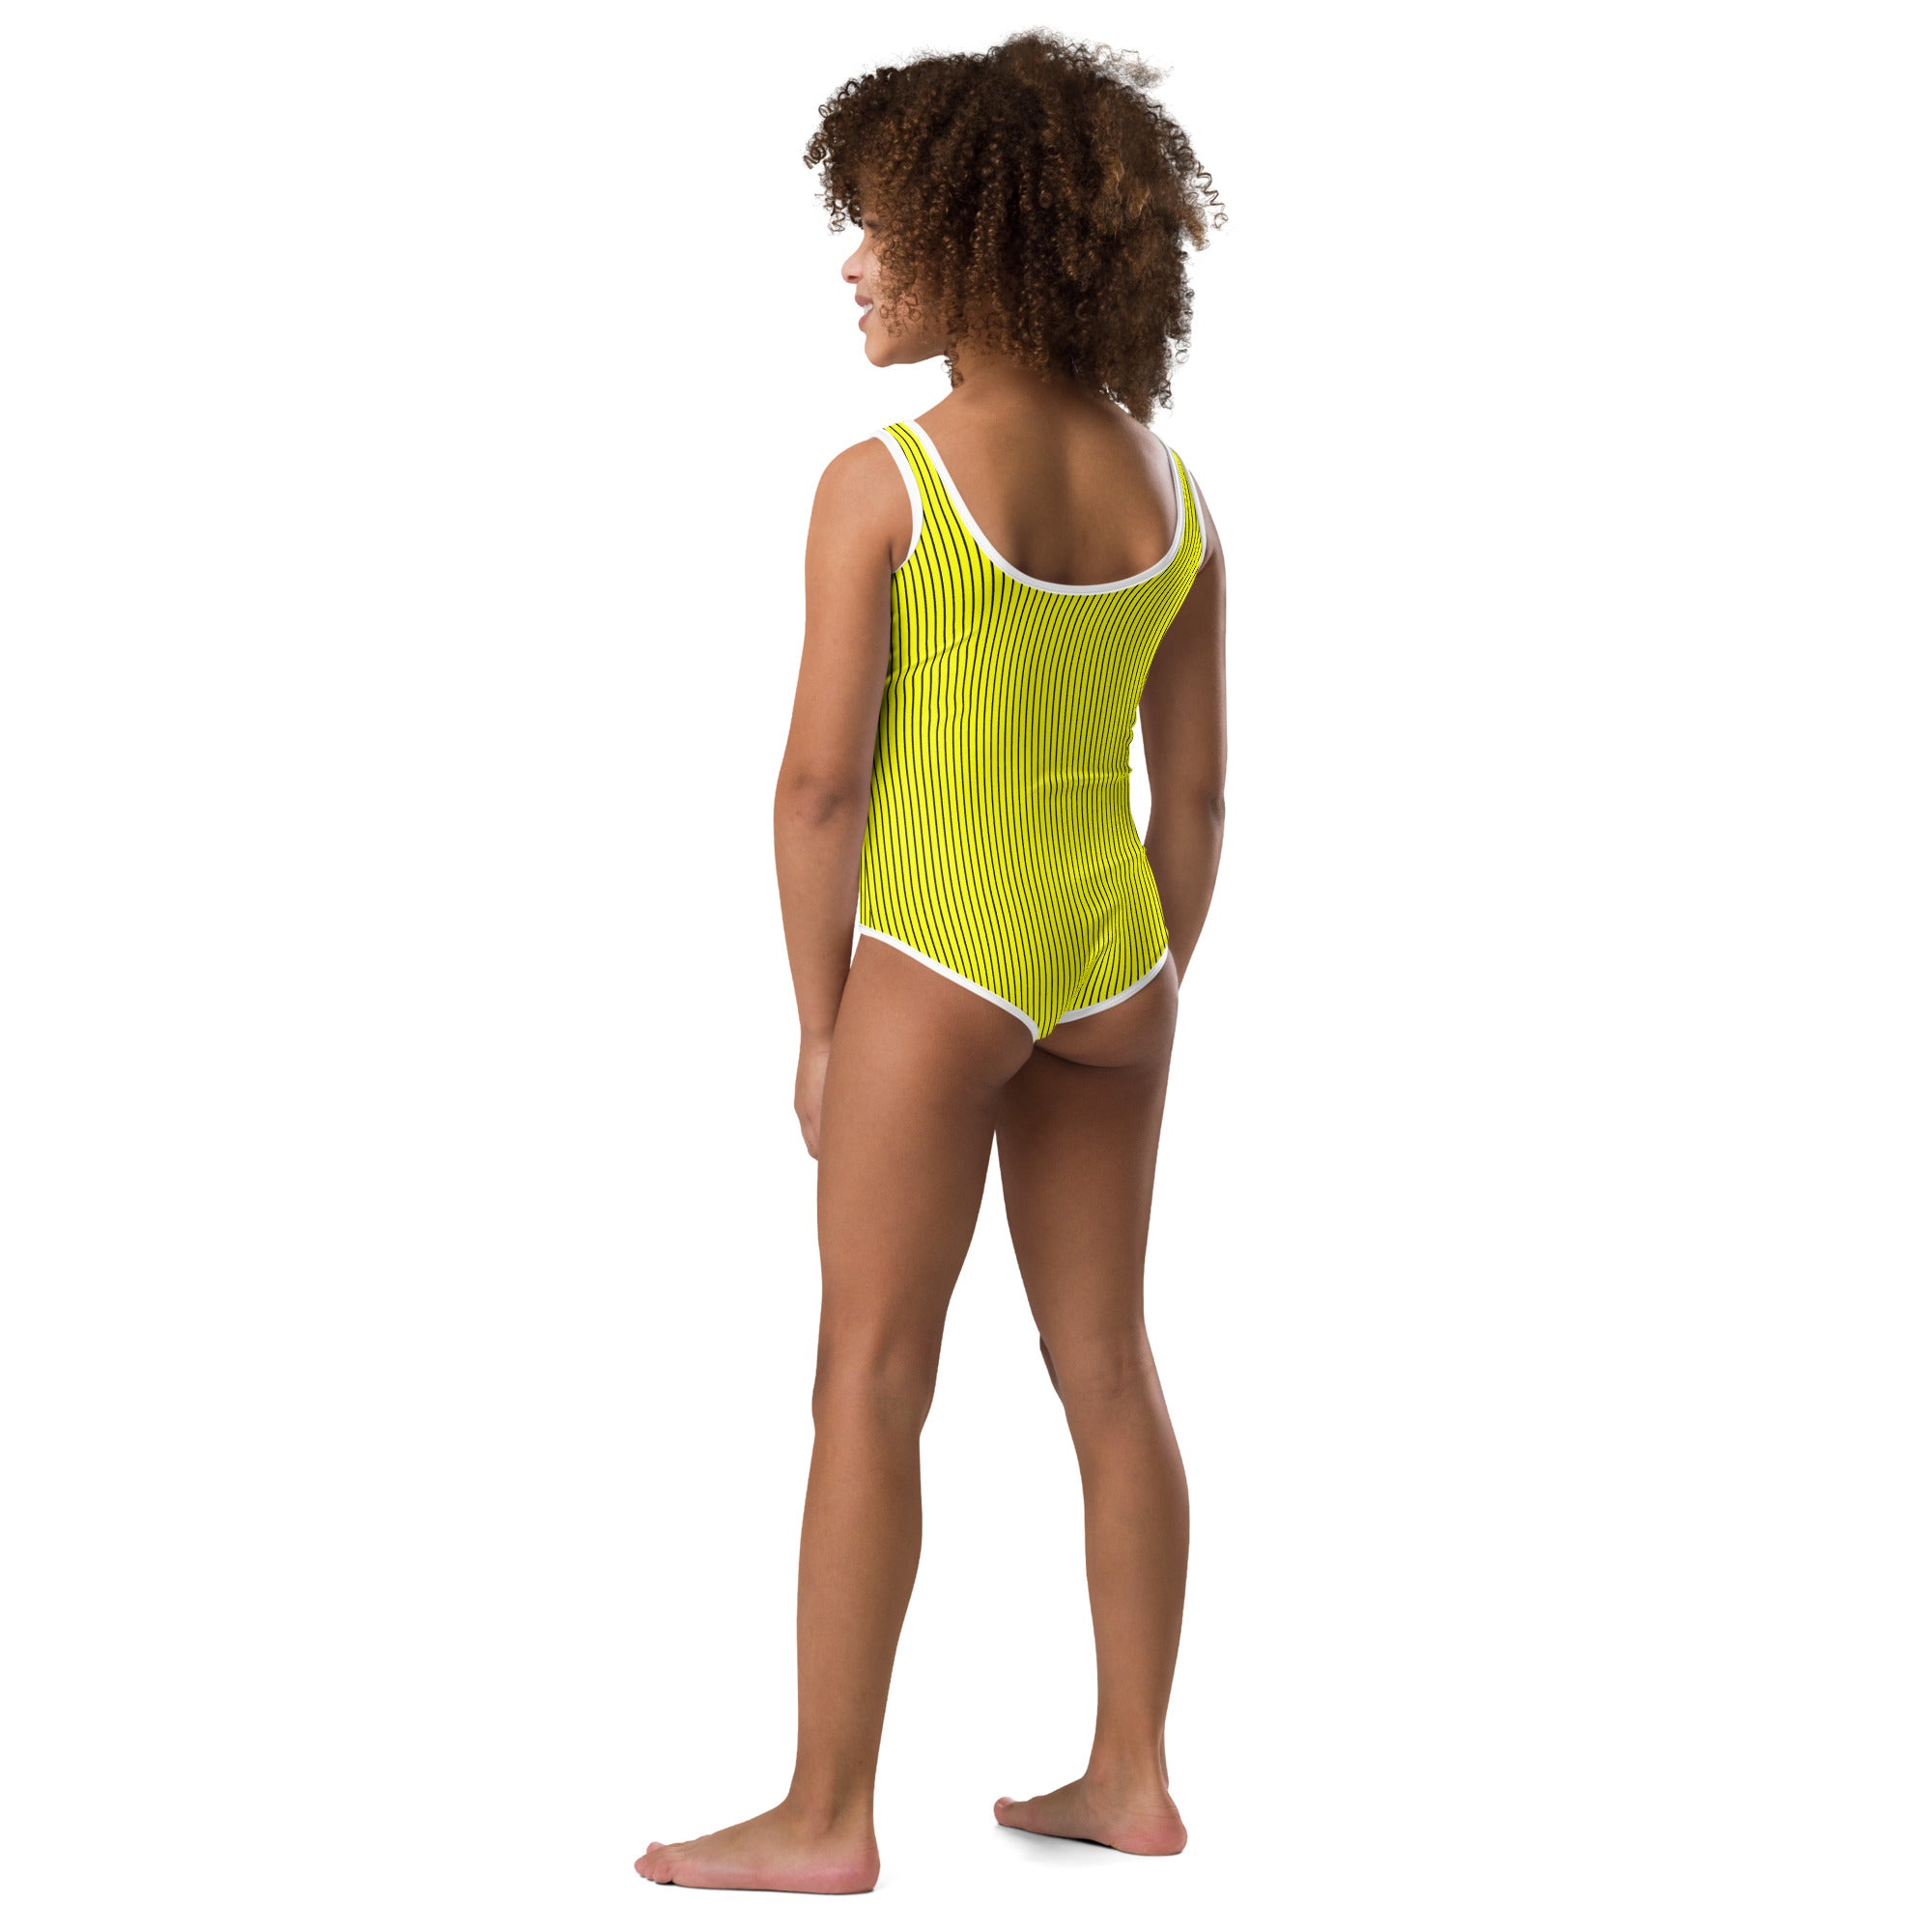 All-Over Print Kids Swimsuit- Yellow with Black Stripes